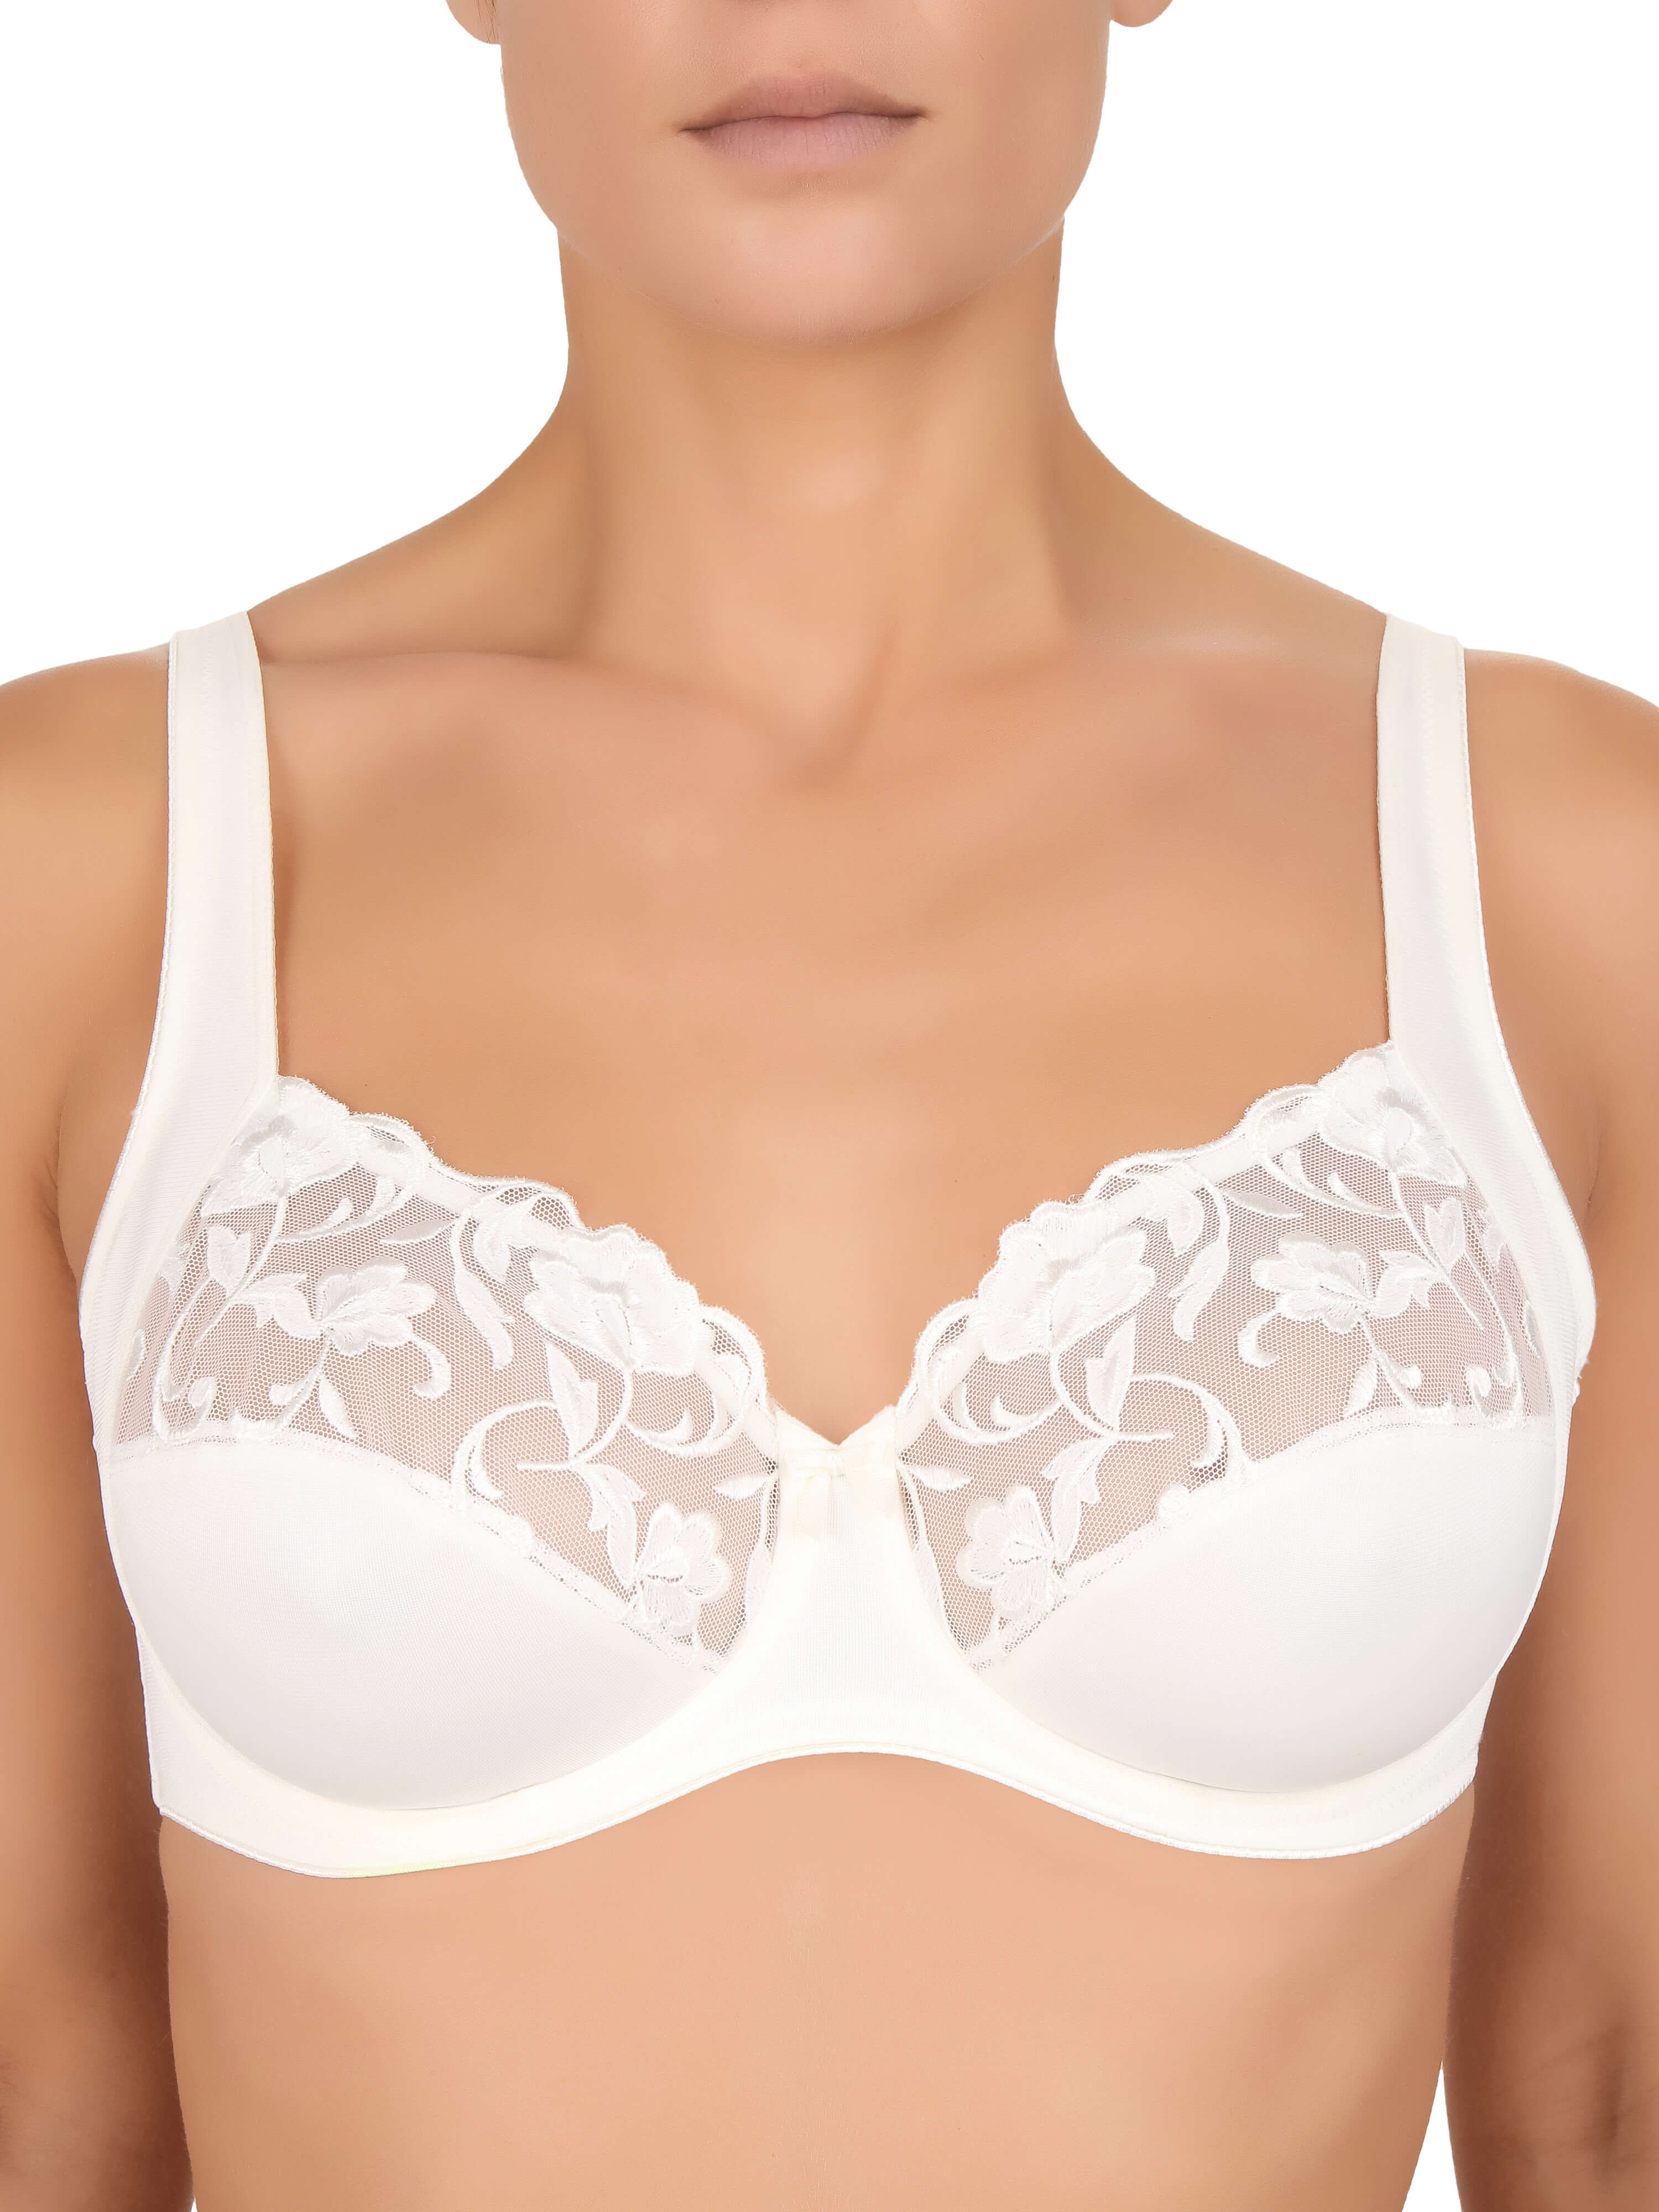 Underwired bra from the Moments collection by Félina